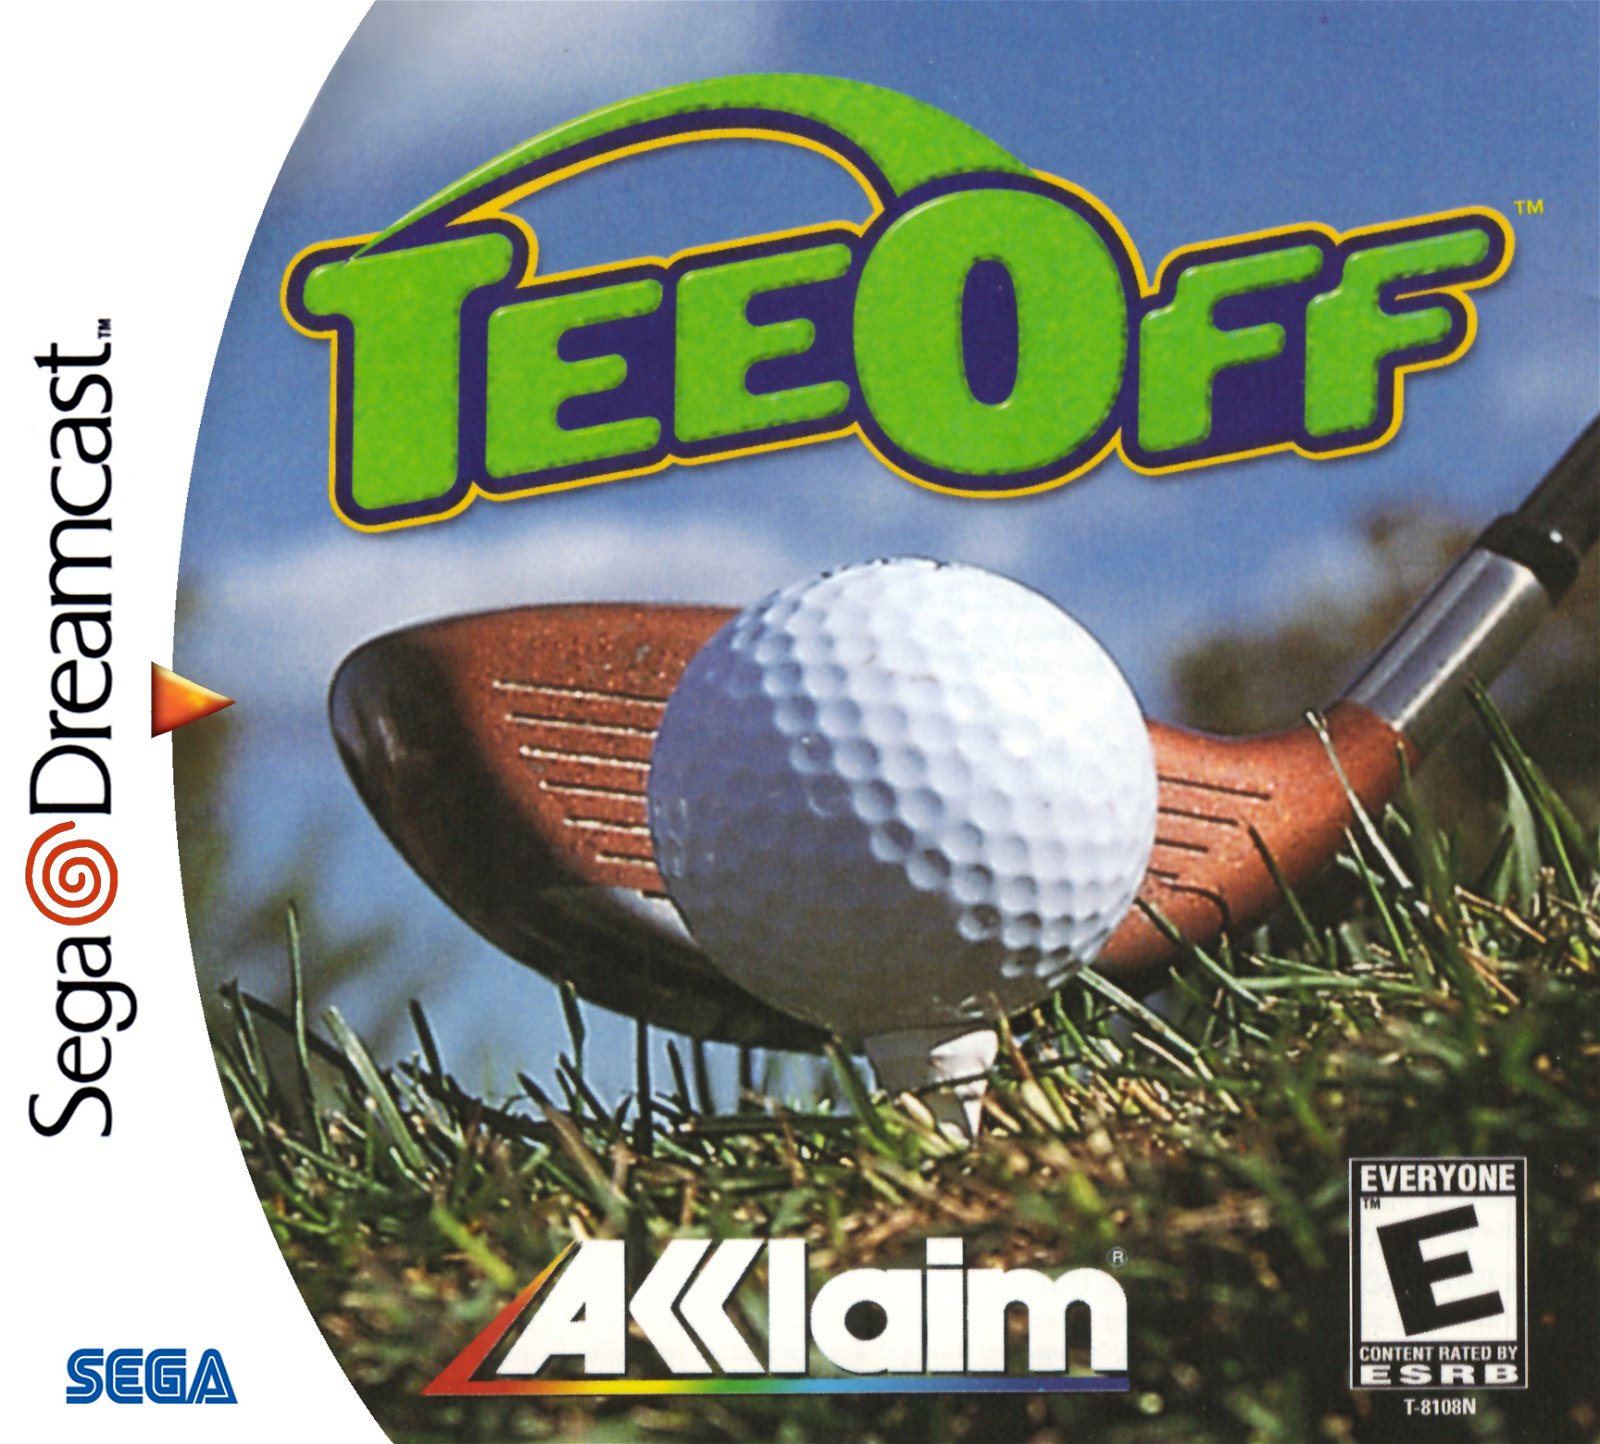 Image of Tee Off